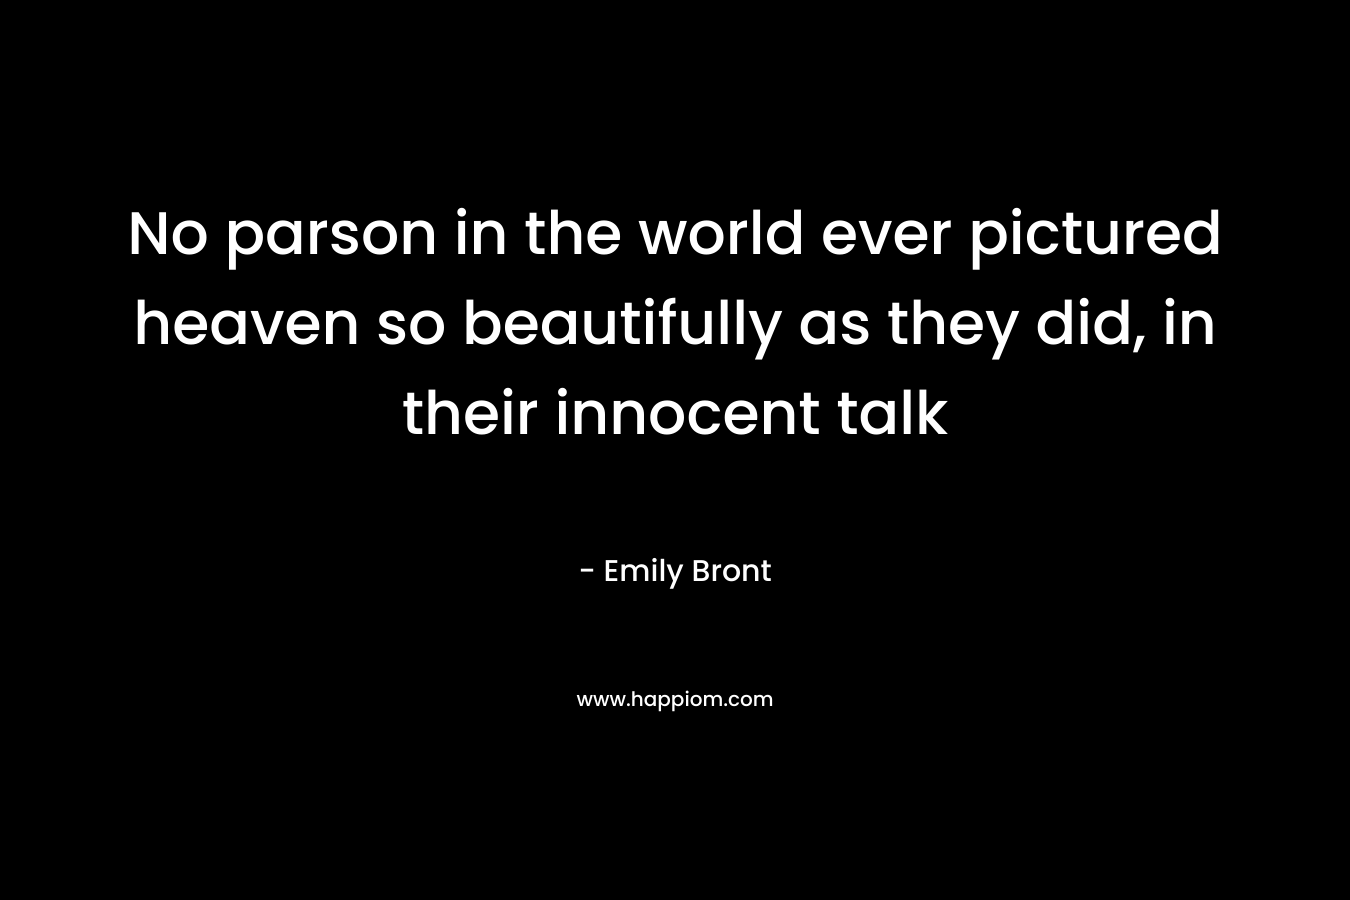 No parson in the world ever pictured heaven so beautifully as they did, in their innocent talk – Emily Bront